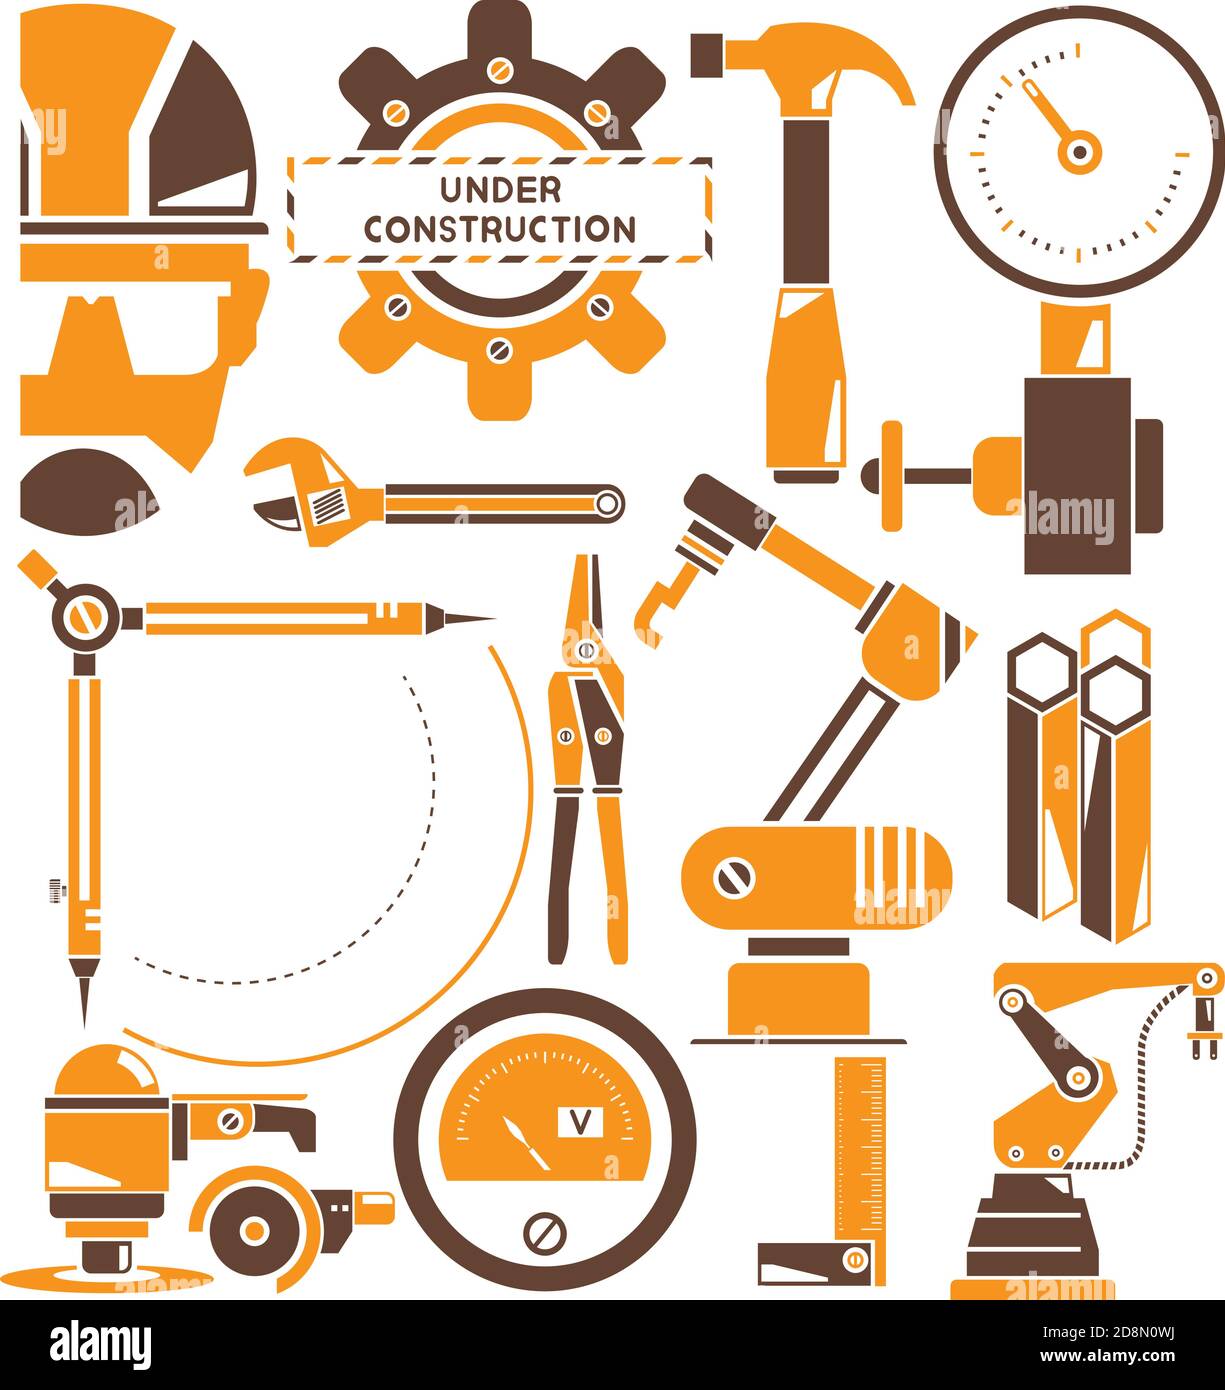 engineering, automation, and industrial management icons set, brown and orange theme Stock Vector